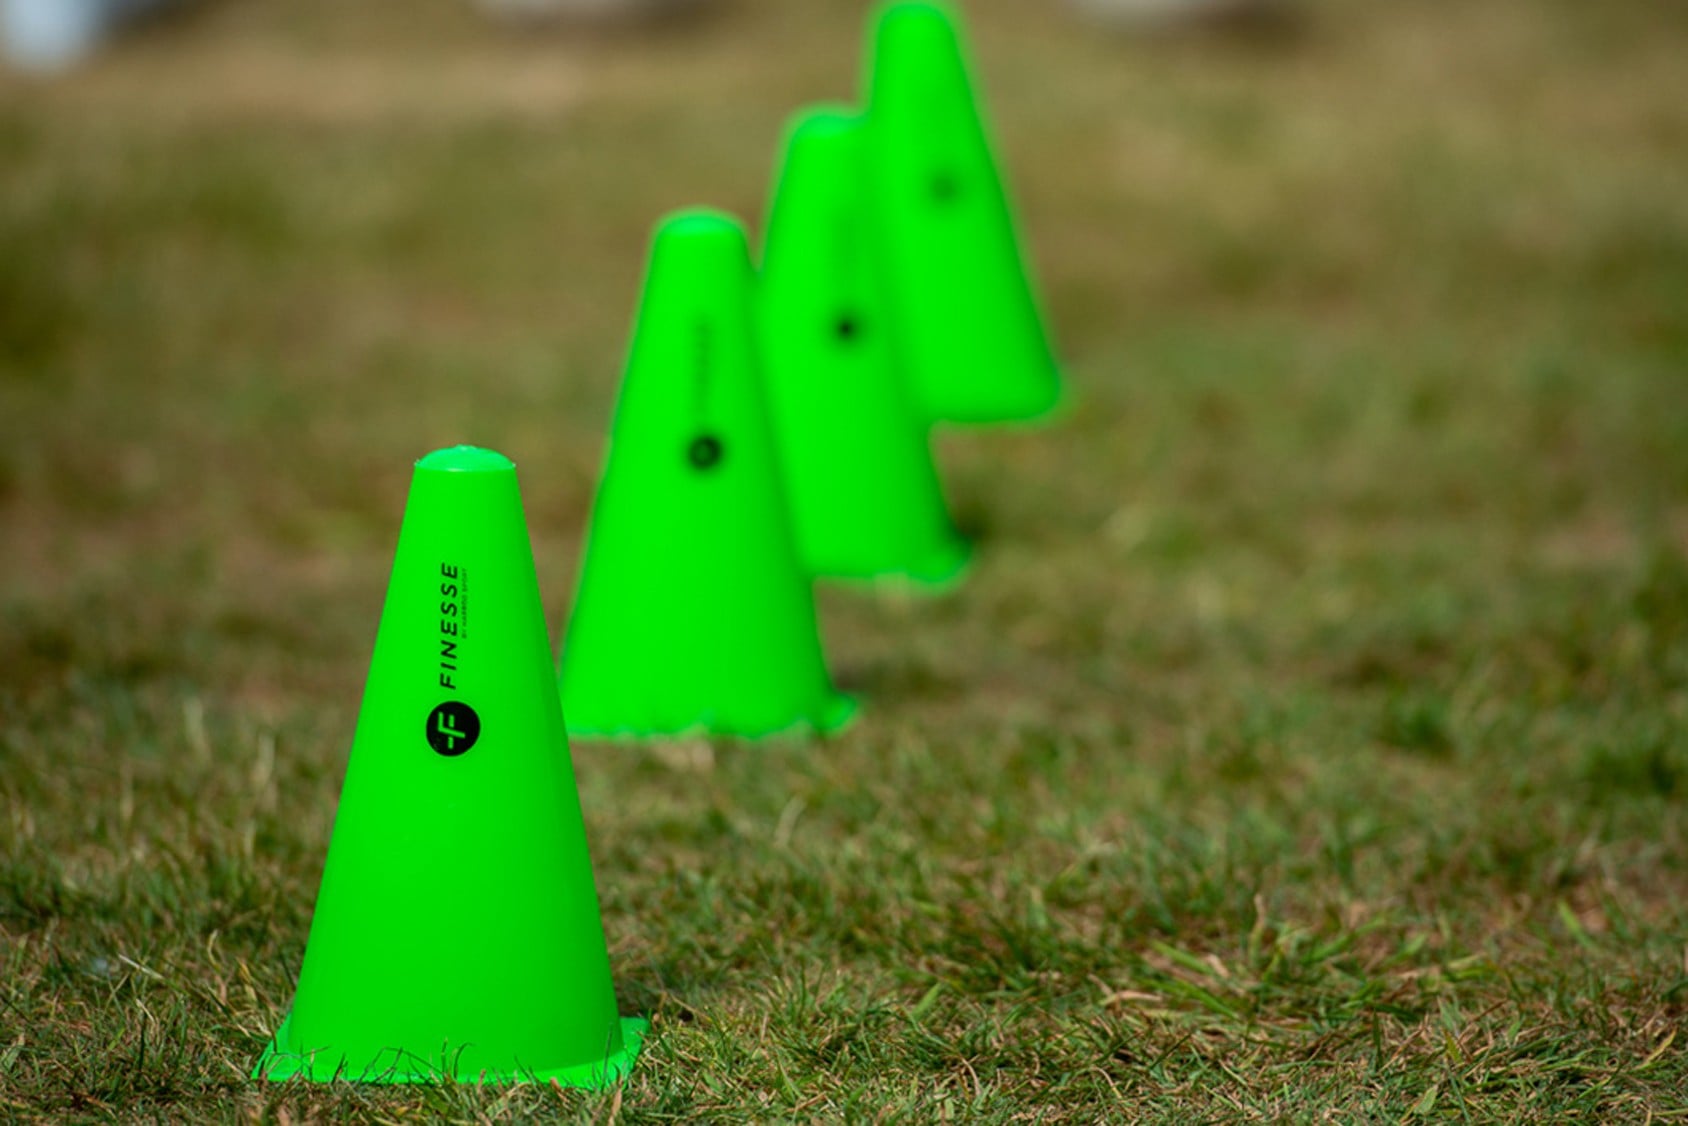 Finesse Agility Cones (Set of 8)